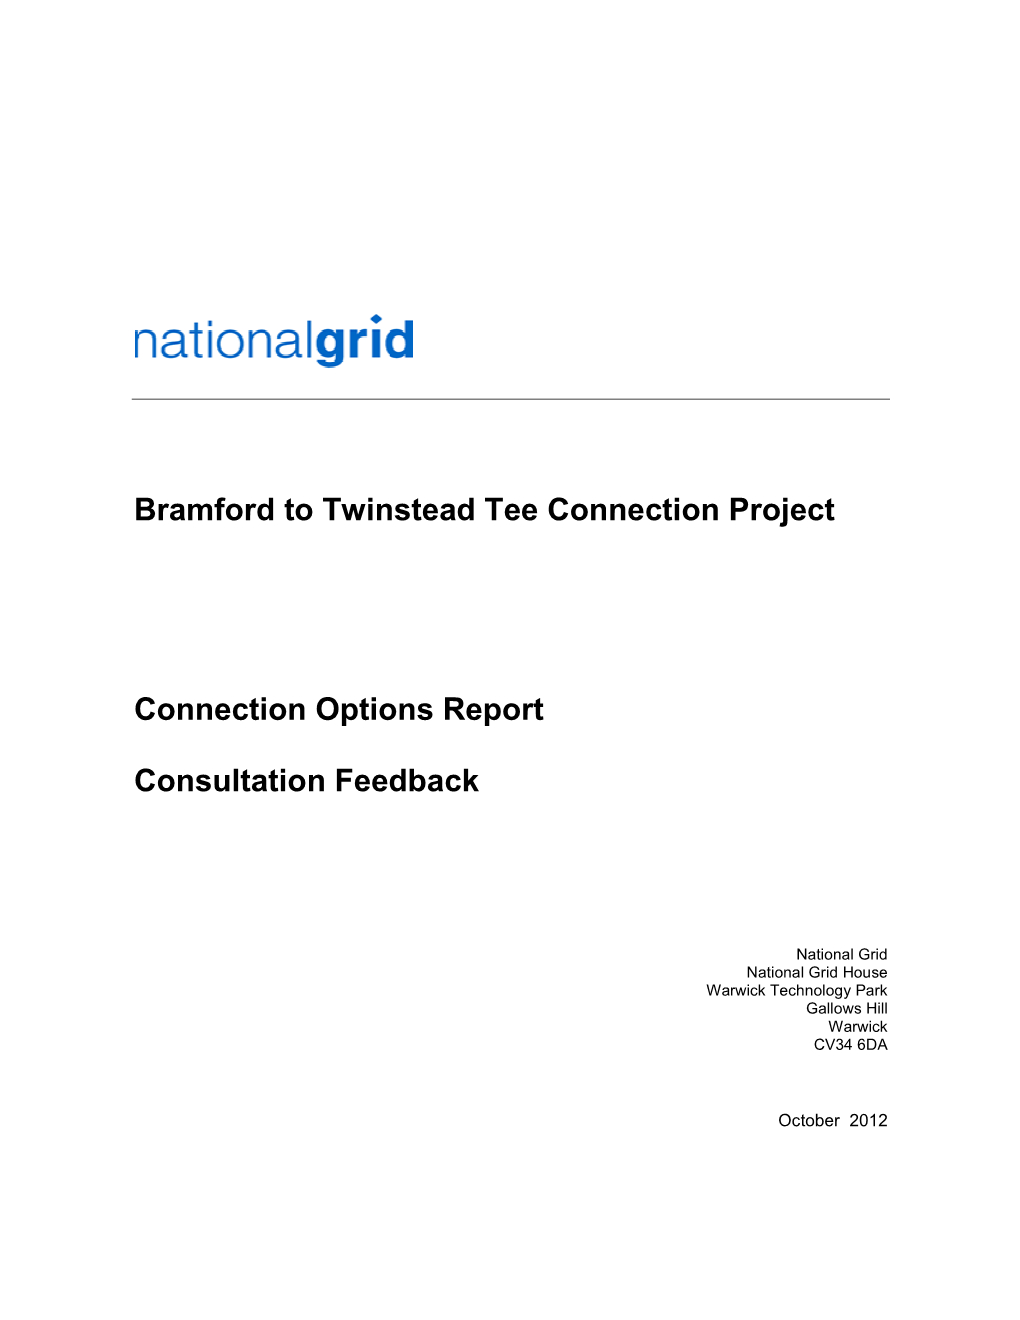 Connection Options Feedback Report October 2012